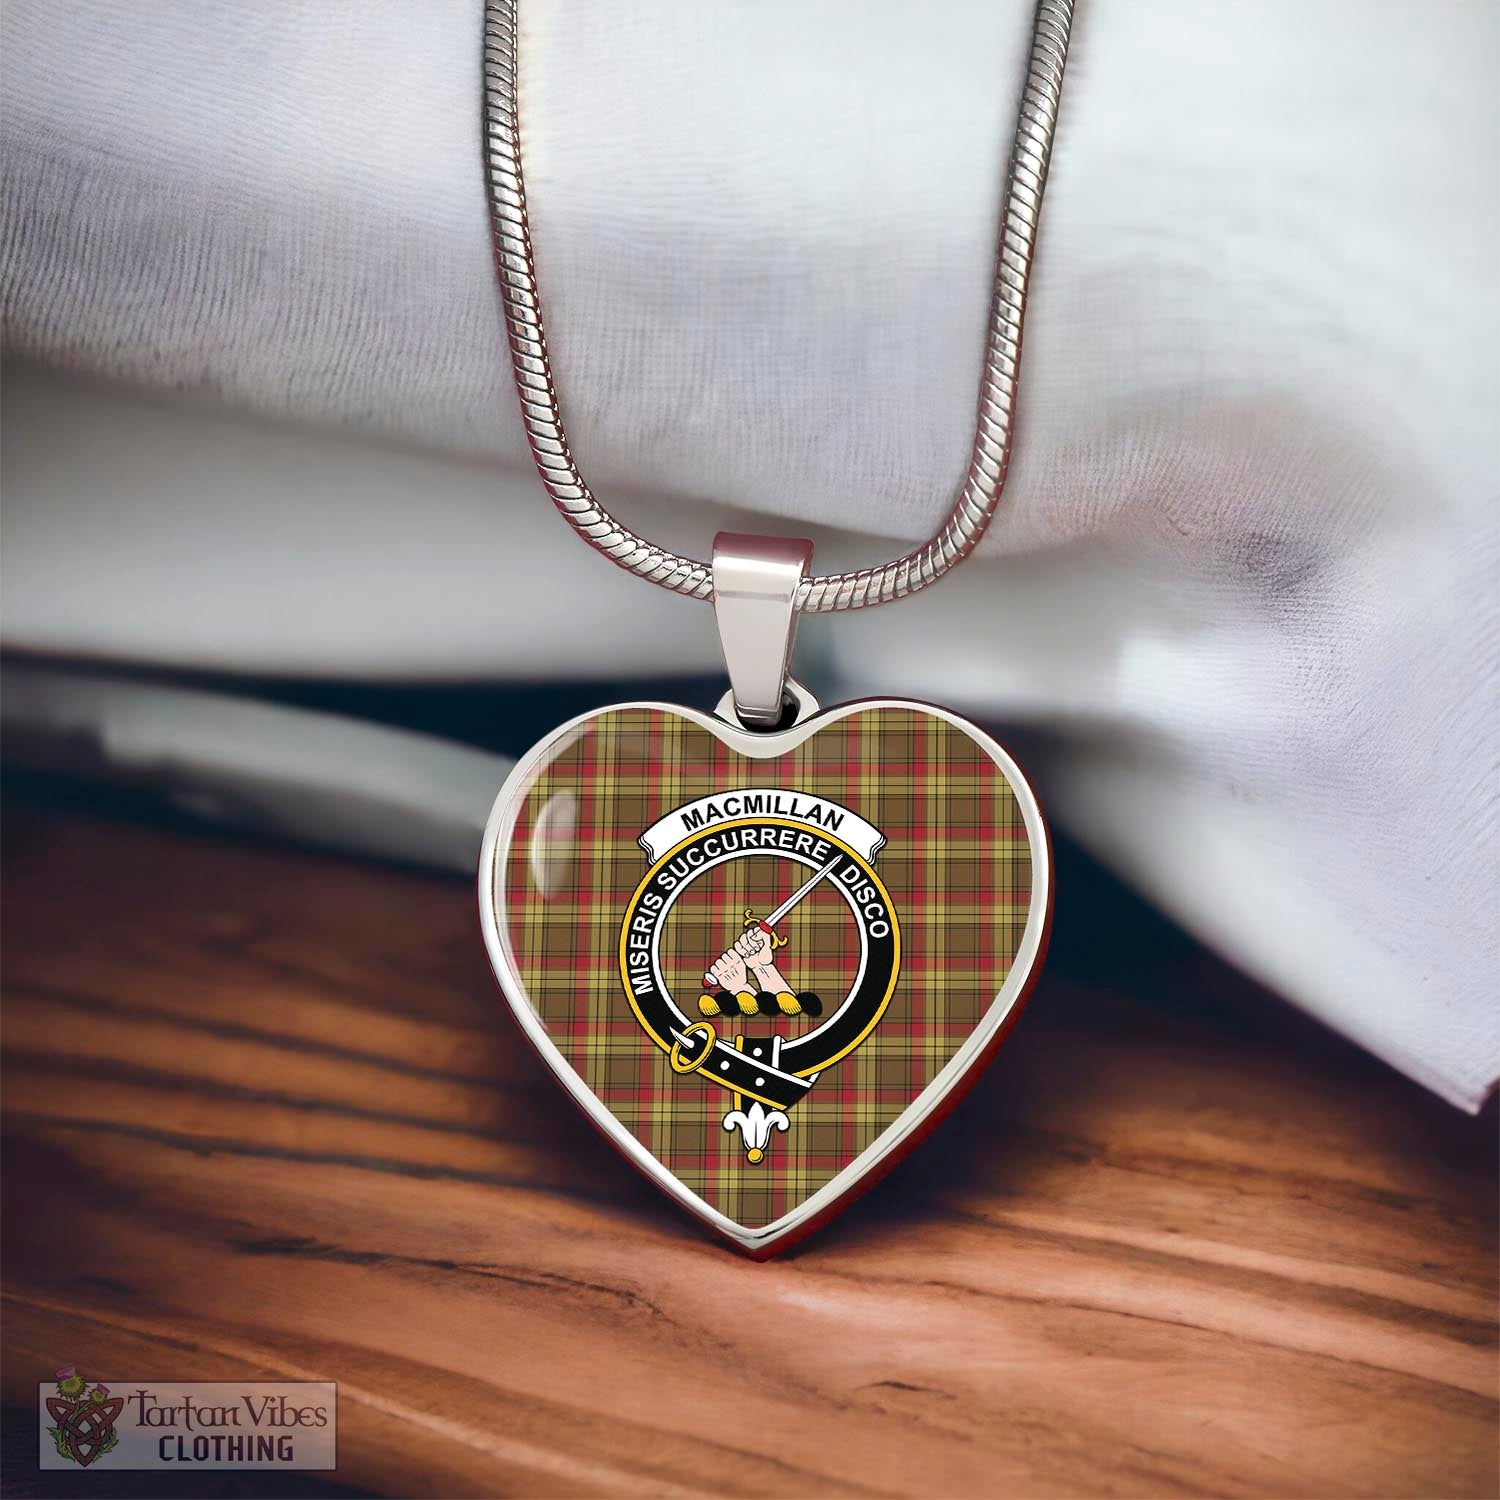 Tartan Vibes Clothing MacMillan Old Weathered Tartan Heart Necklace with Family Crest